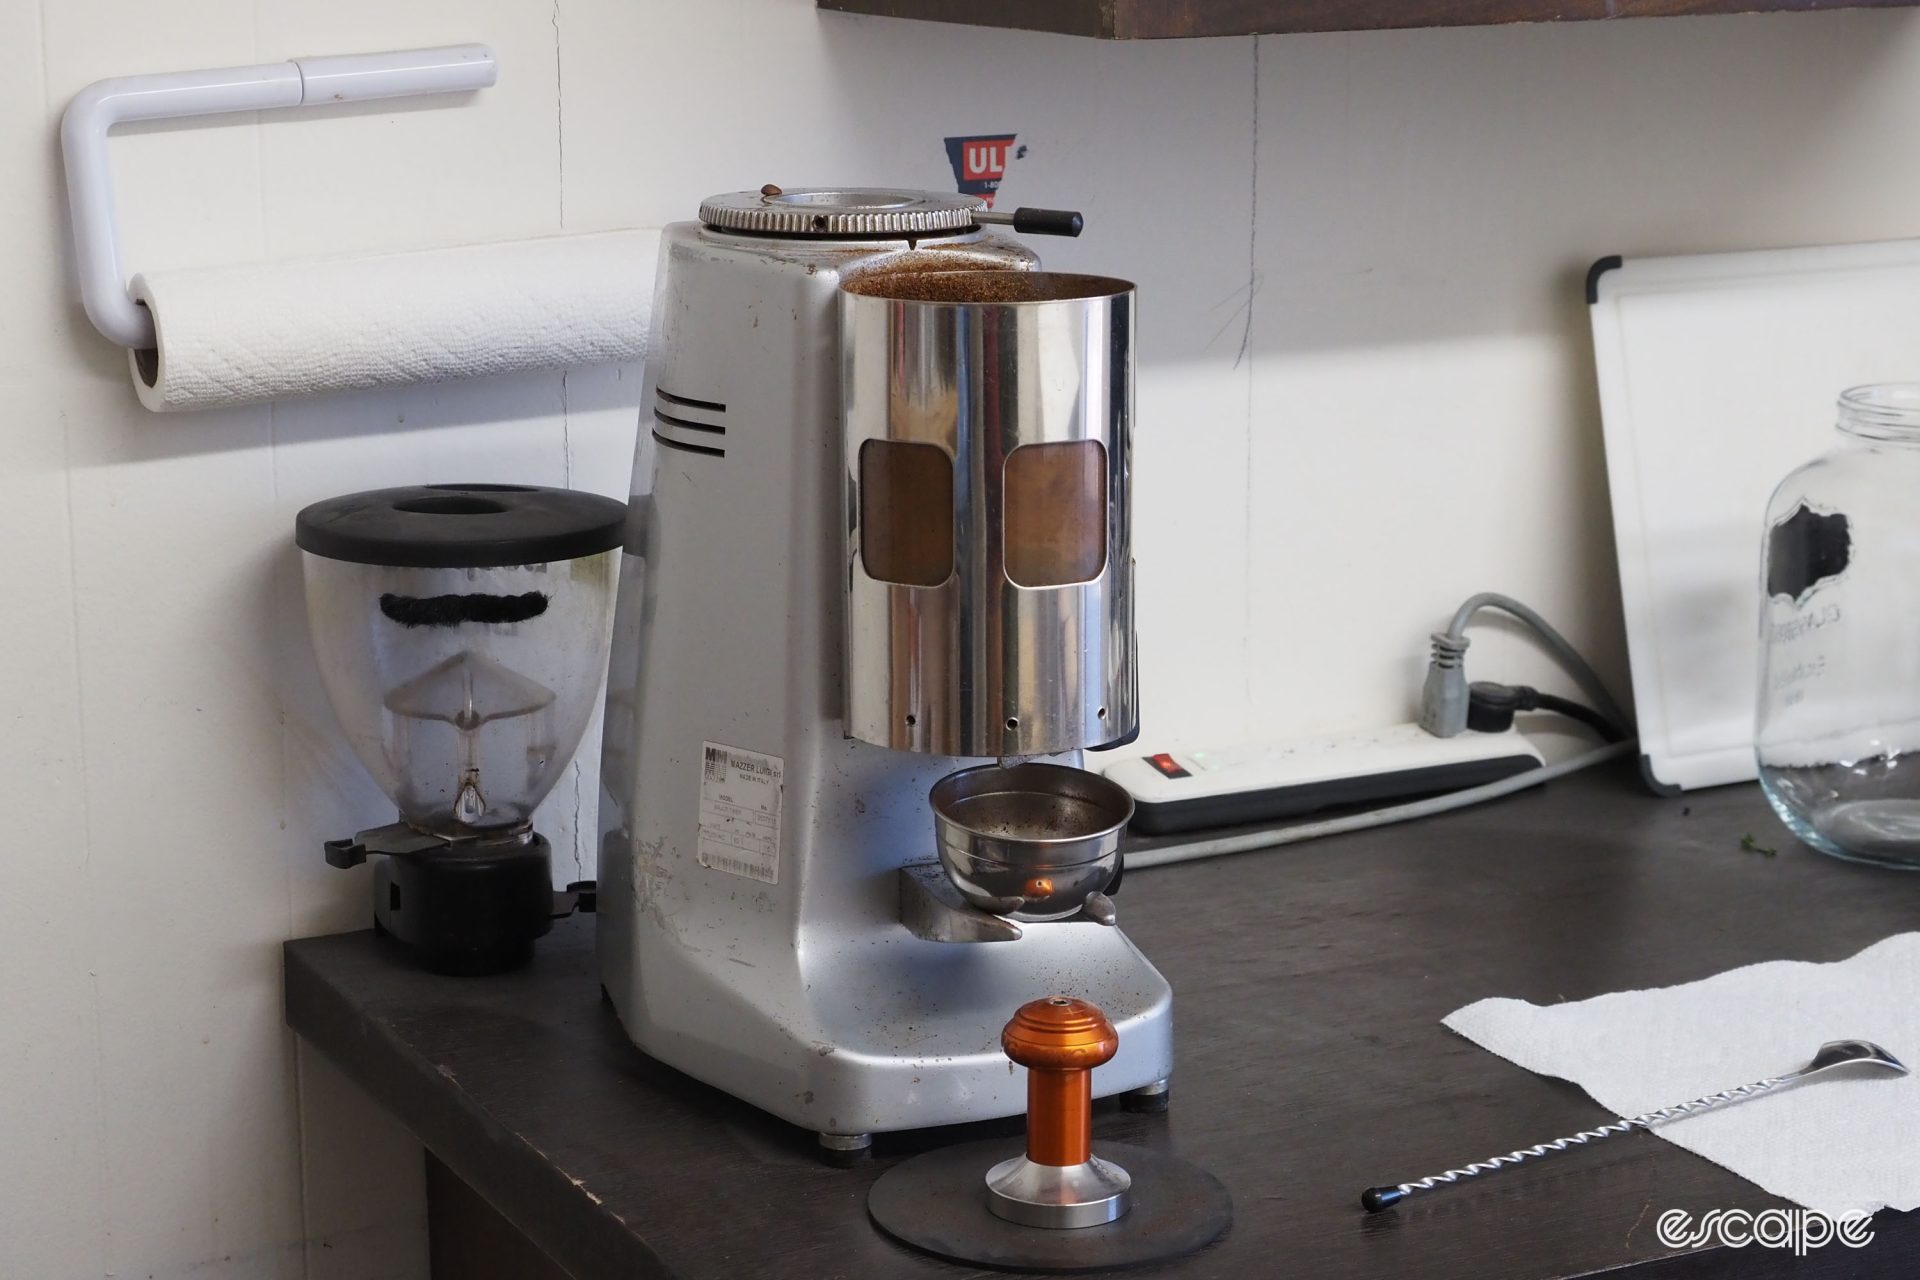 An old bean grinder for coffee sits on a bench, along with a Chris King espresso tamper in orange.